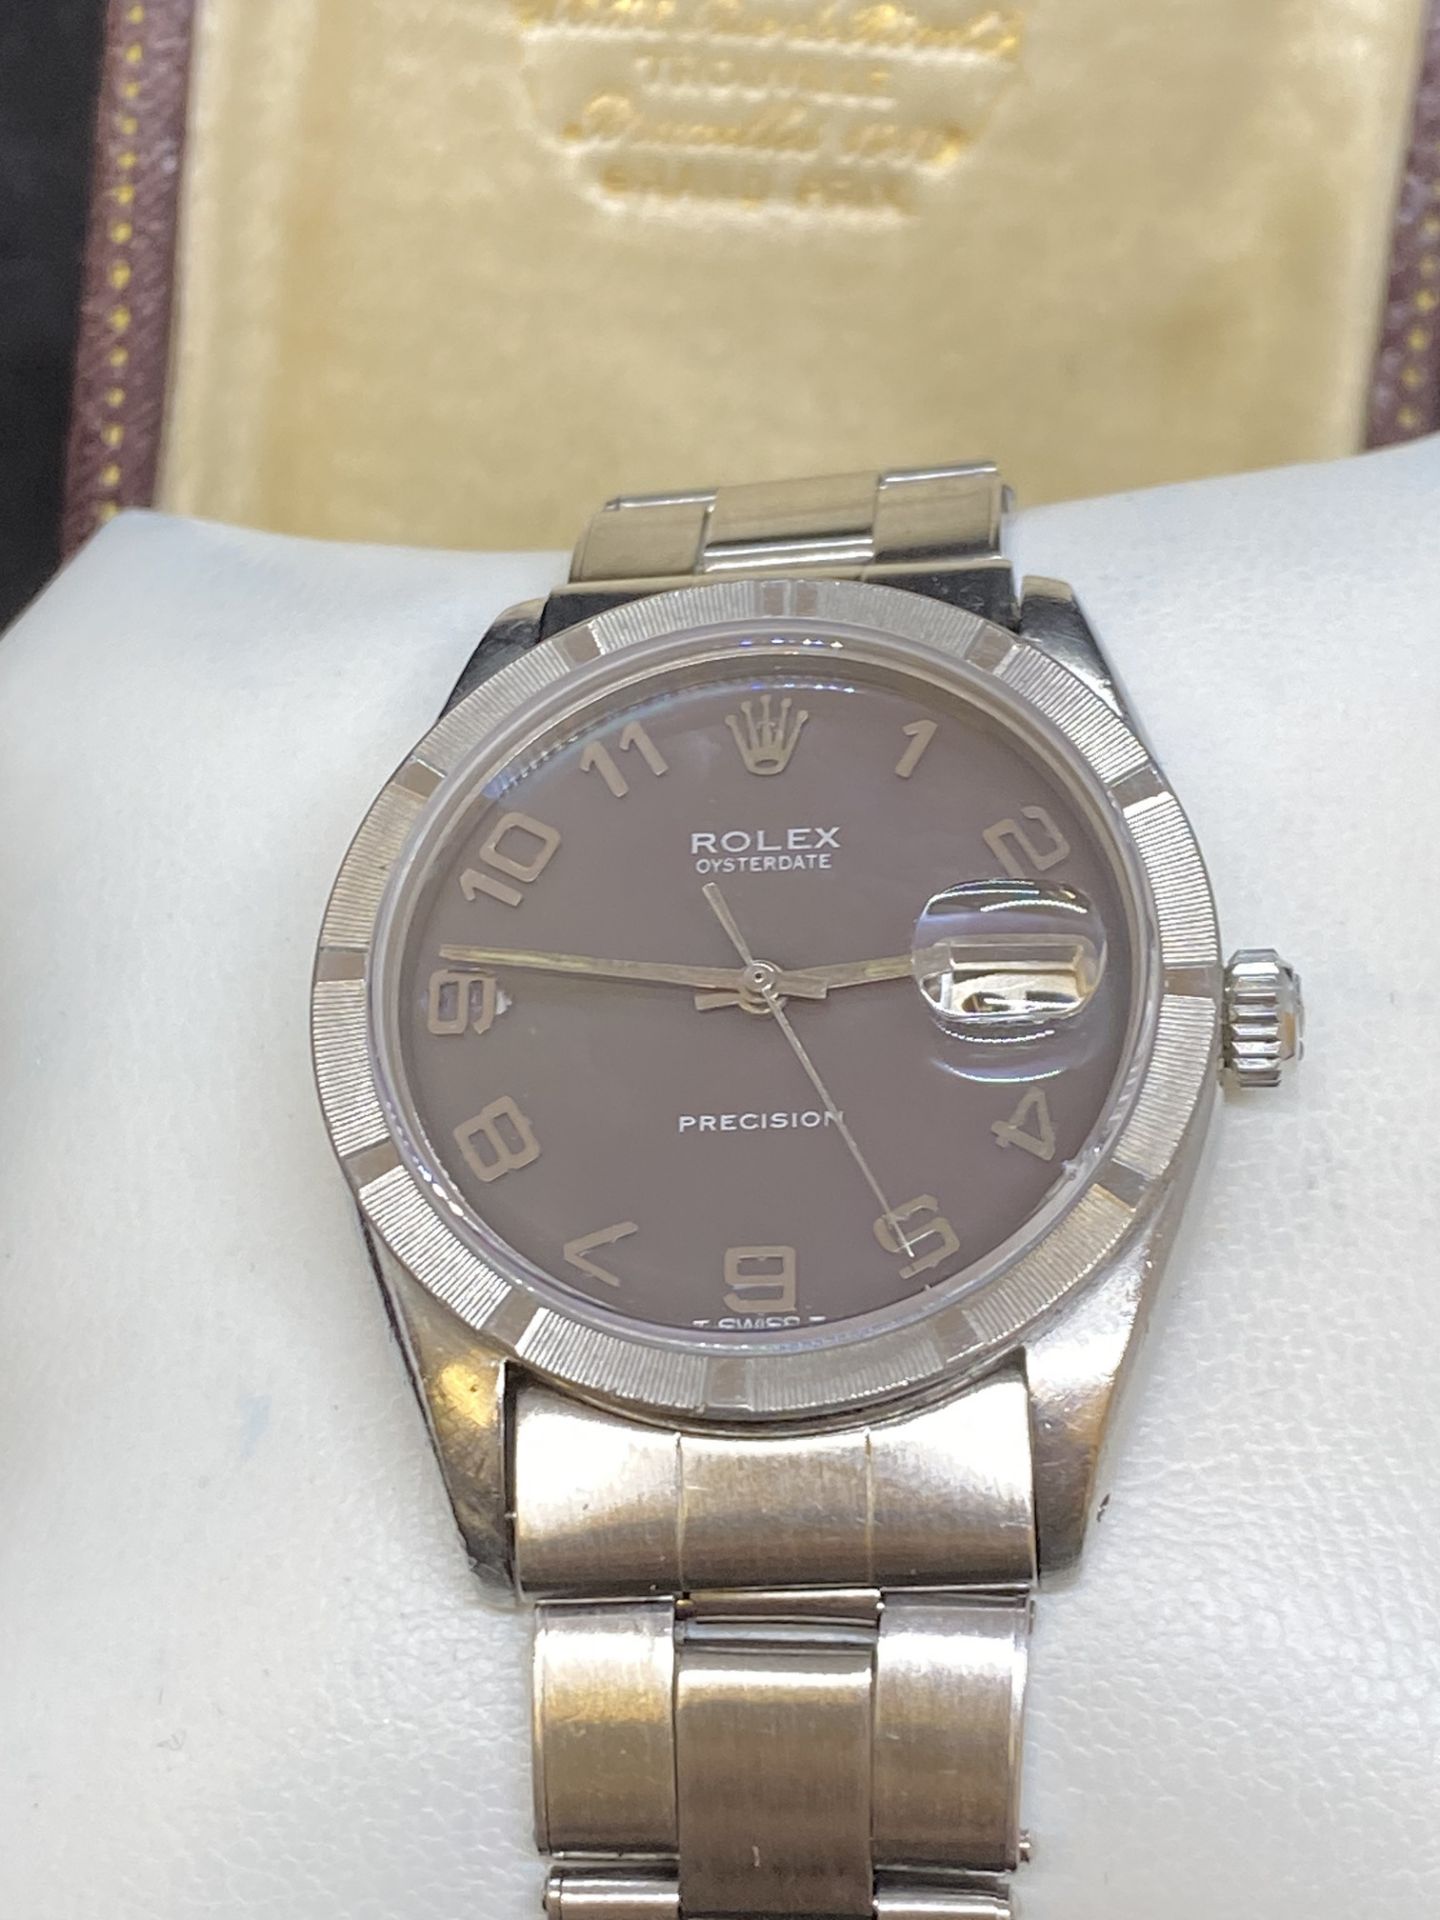 ROLEX OYSTERDATE PRECISION WATCH - Image 4 of 15